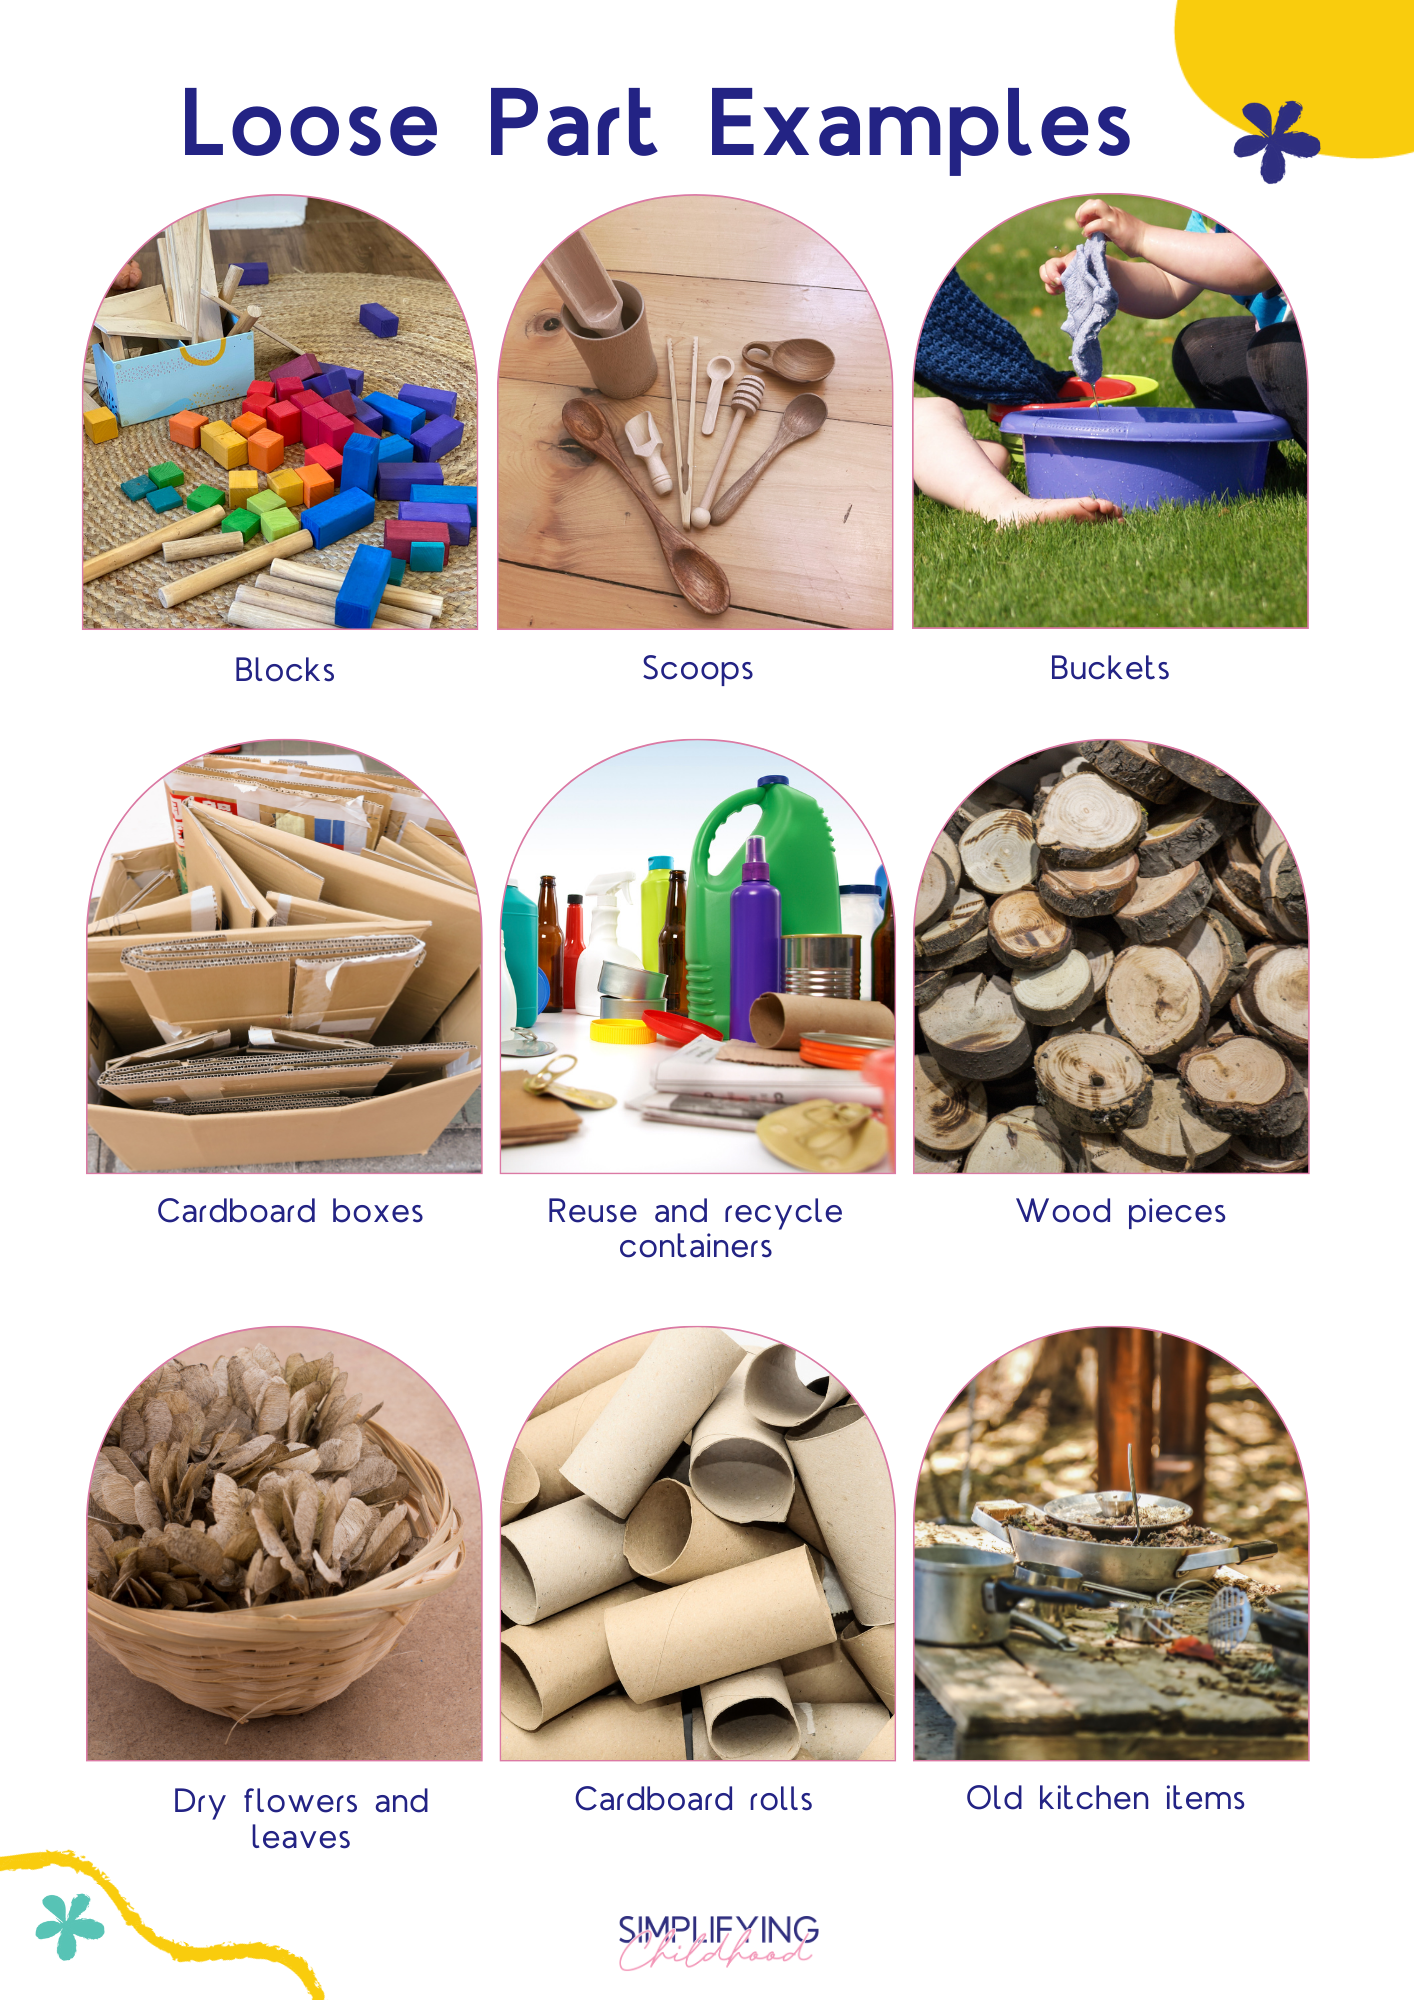 How to Guide to Loose Parts 